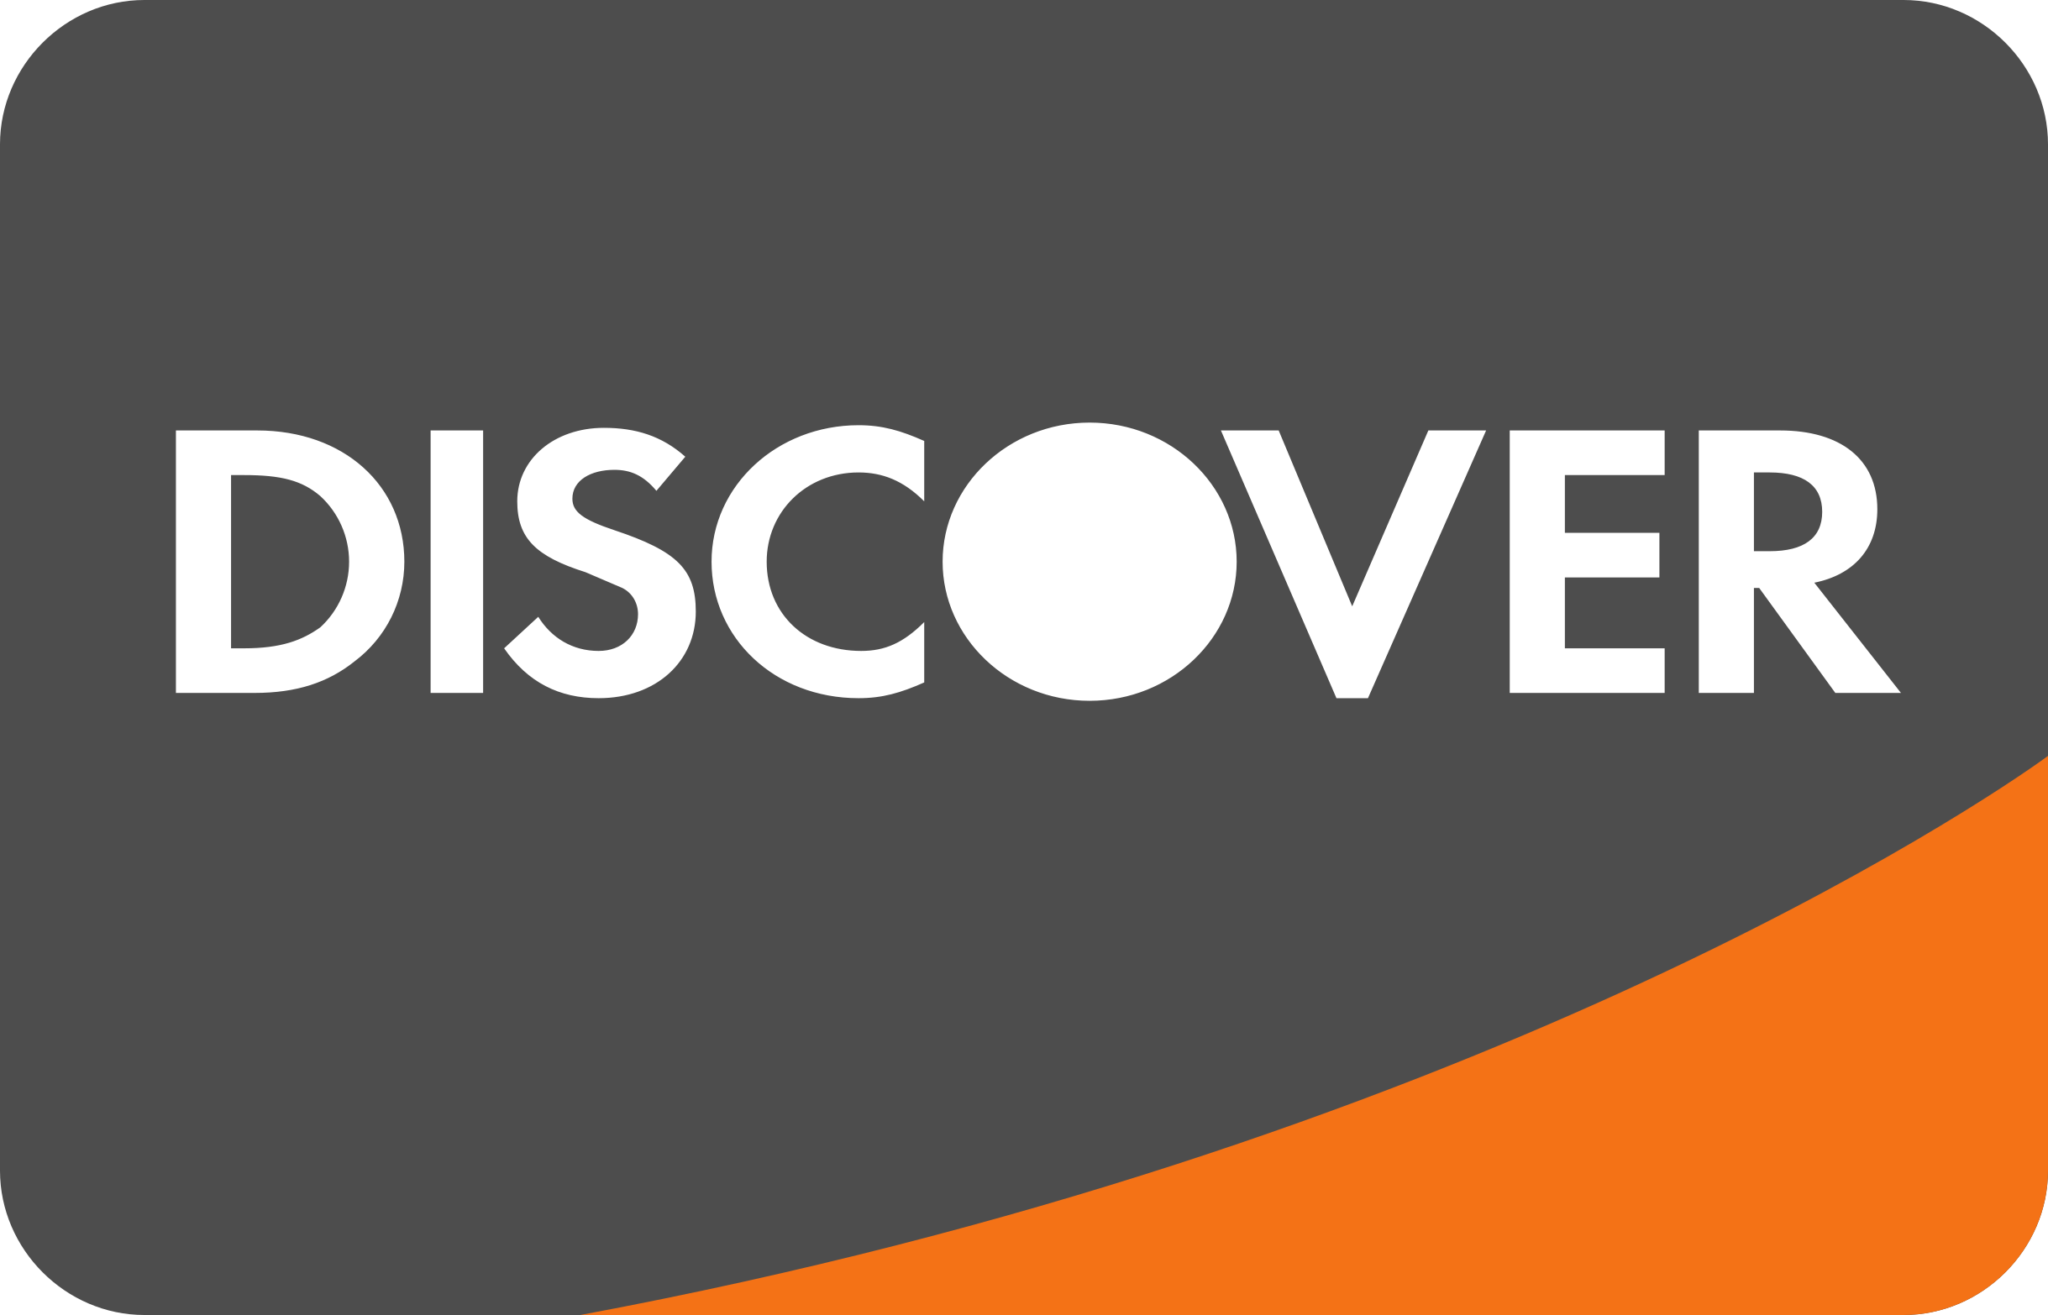 Discover and see. Discover лого. Discover иконка. Discover Card логотип. Discovery карточки.